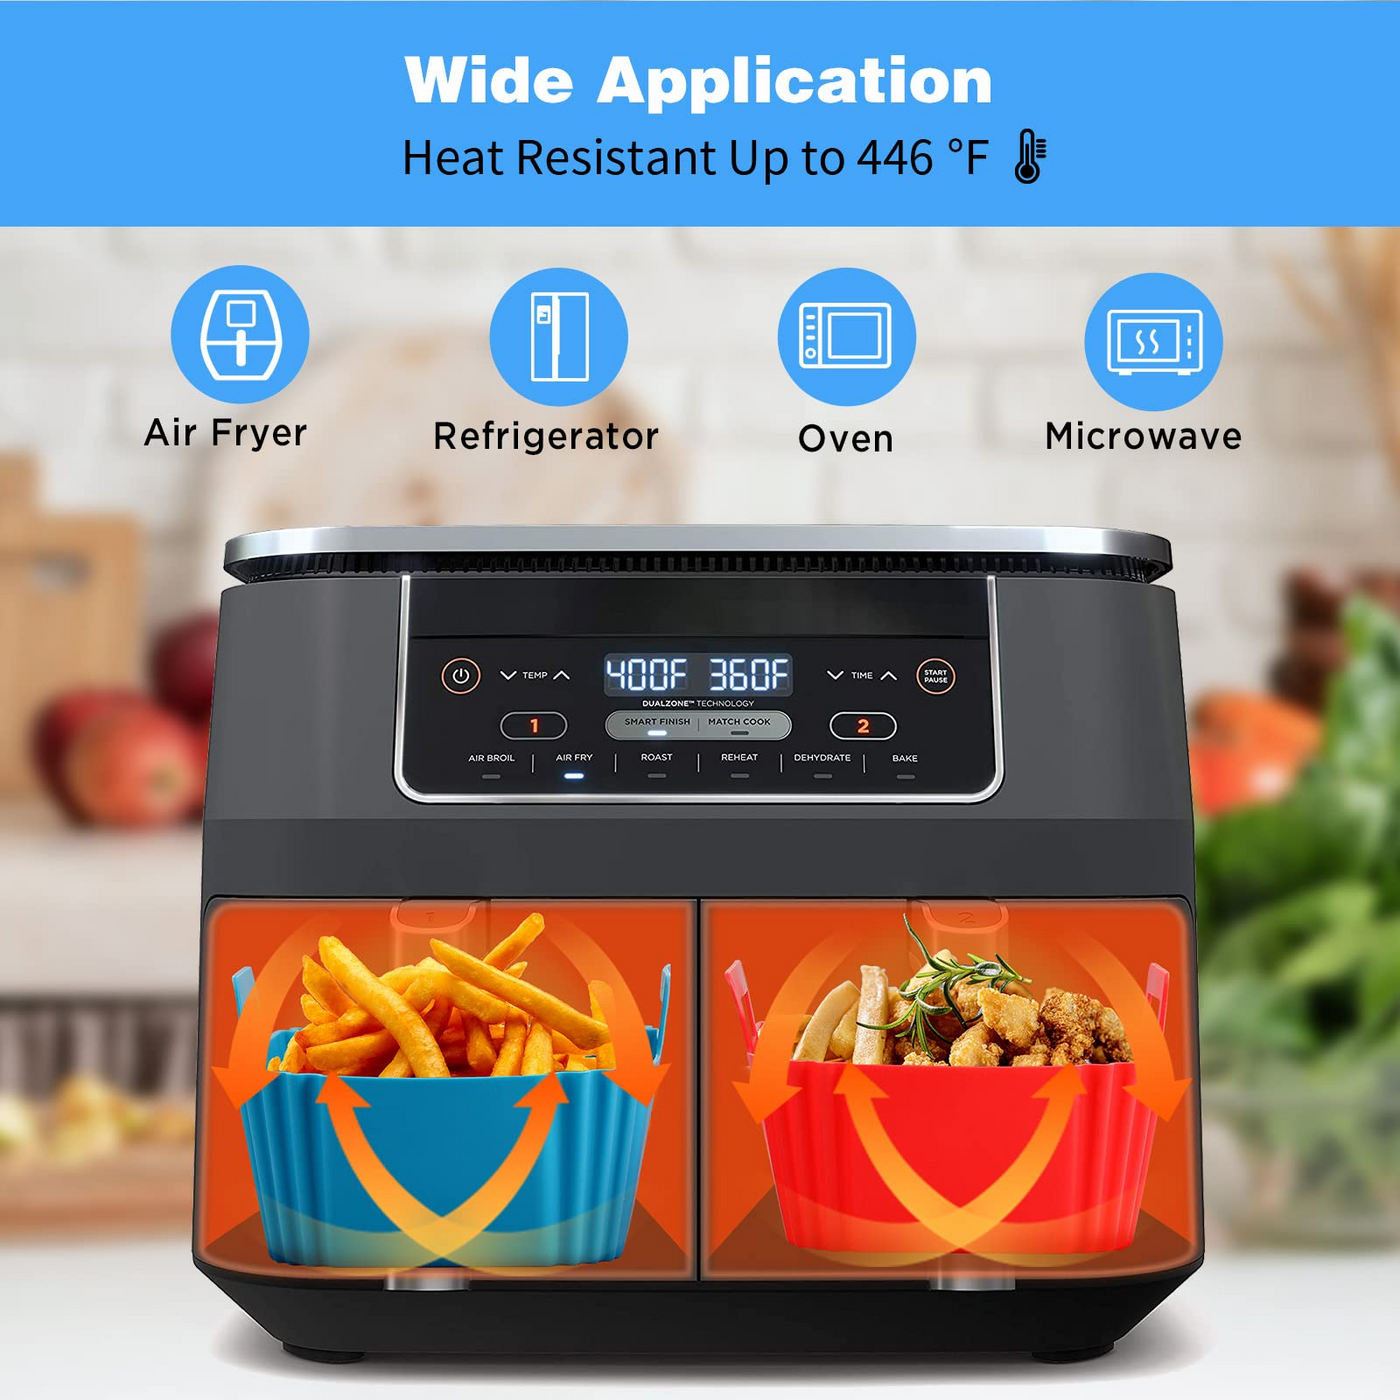 Lieonvis Air Fryer Silicone Pot,Reusable Silicone Air Fryer Liner for 8qt Double Basket Aair Fryer.It Is Compatible with Ninja Brand Dz201,dz401